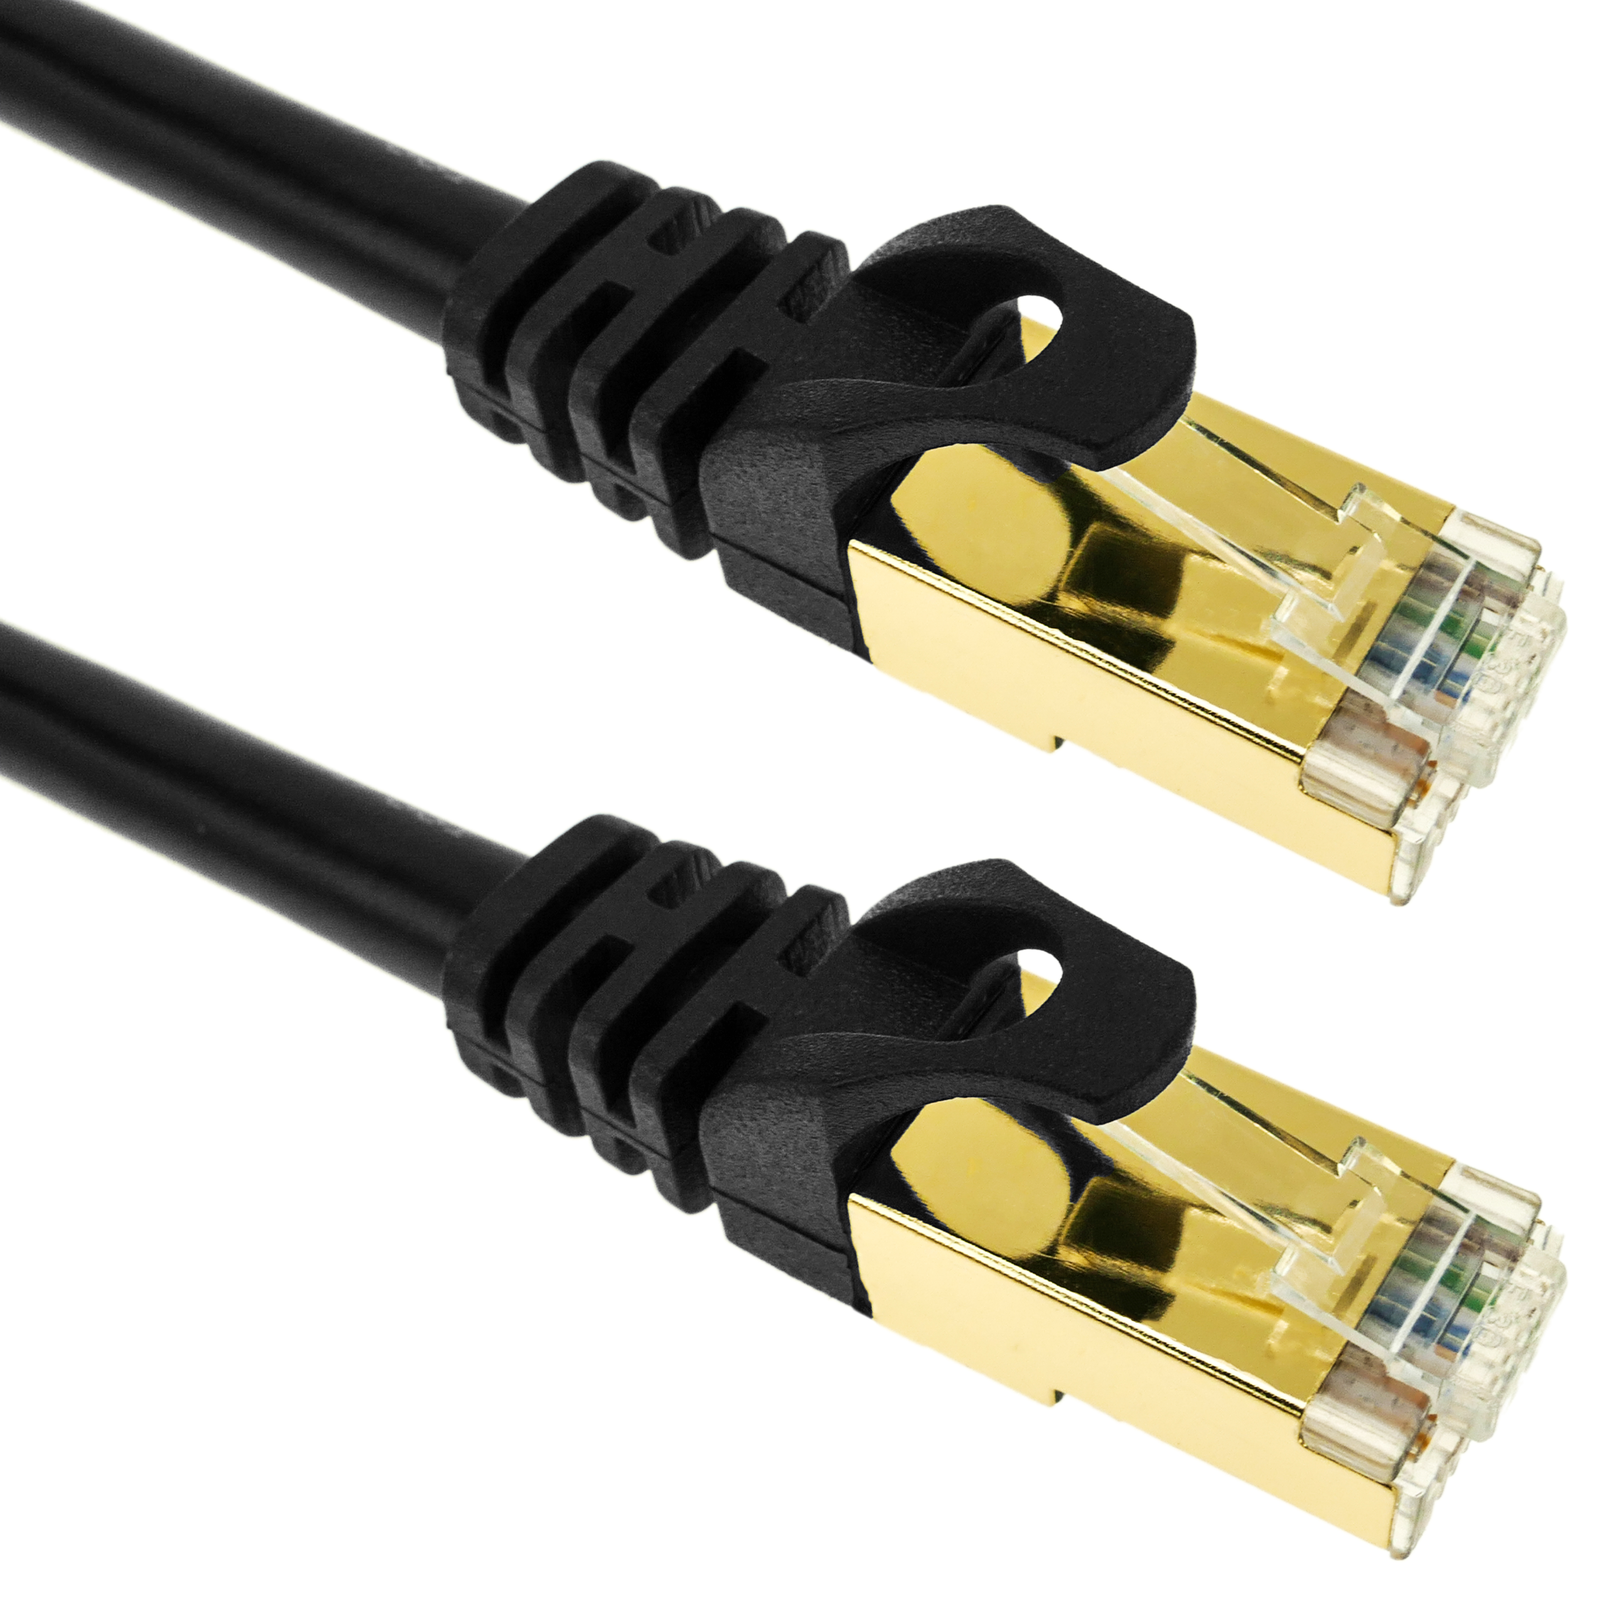 Cable de red ethernet 5 metros LAN SFTP RJ45 Cat.7 negro - Cablematic